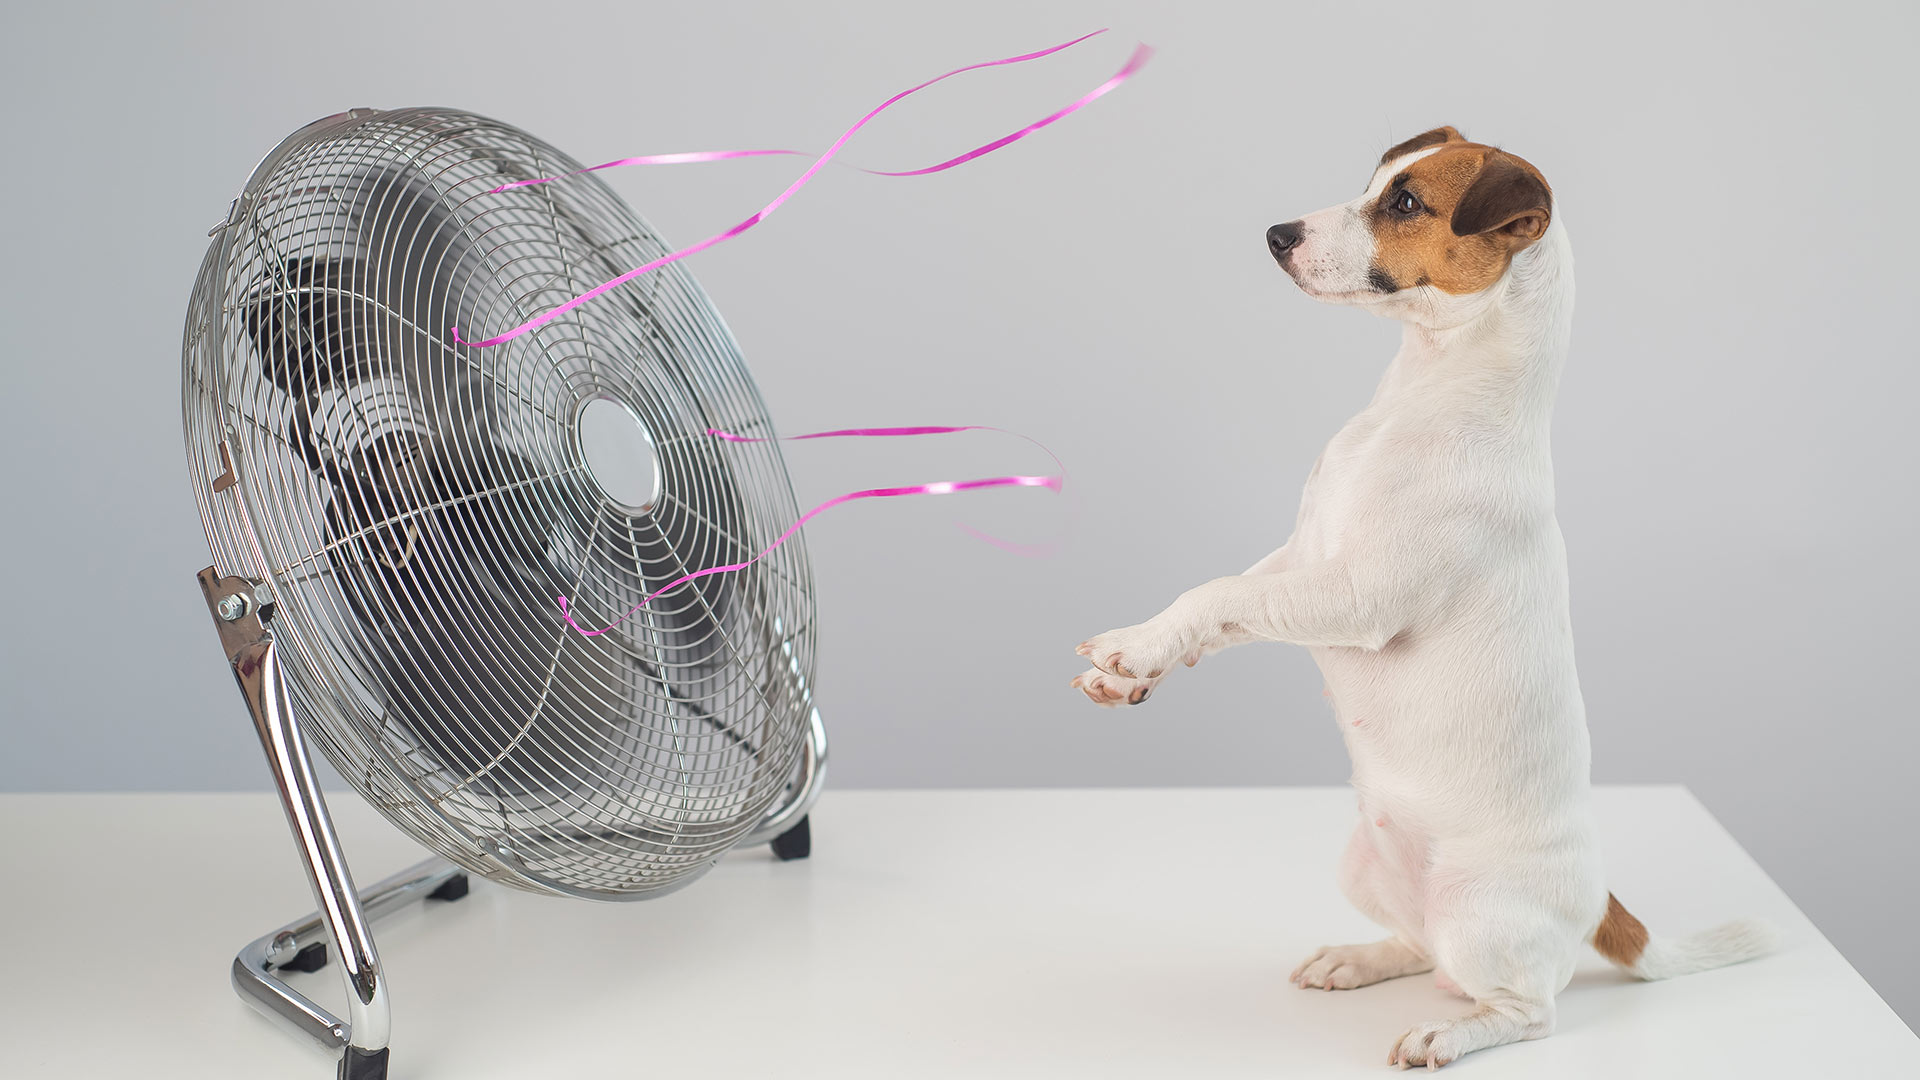 Jack Russell dog in front of fan